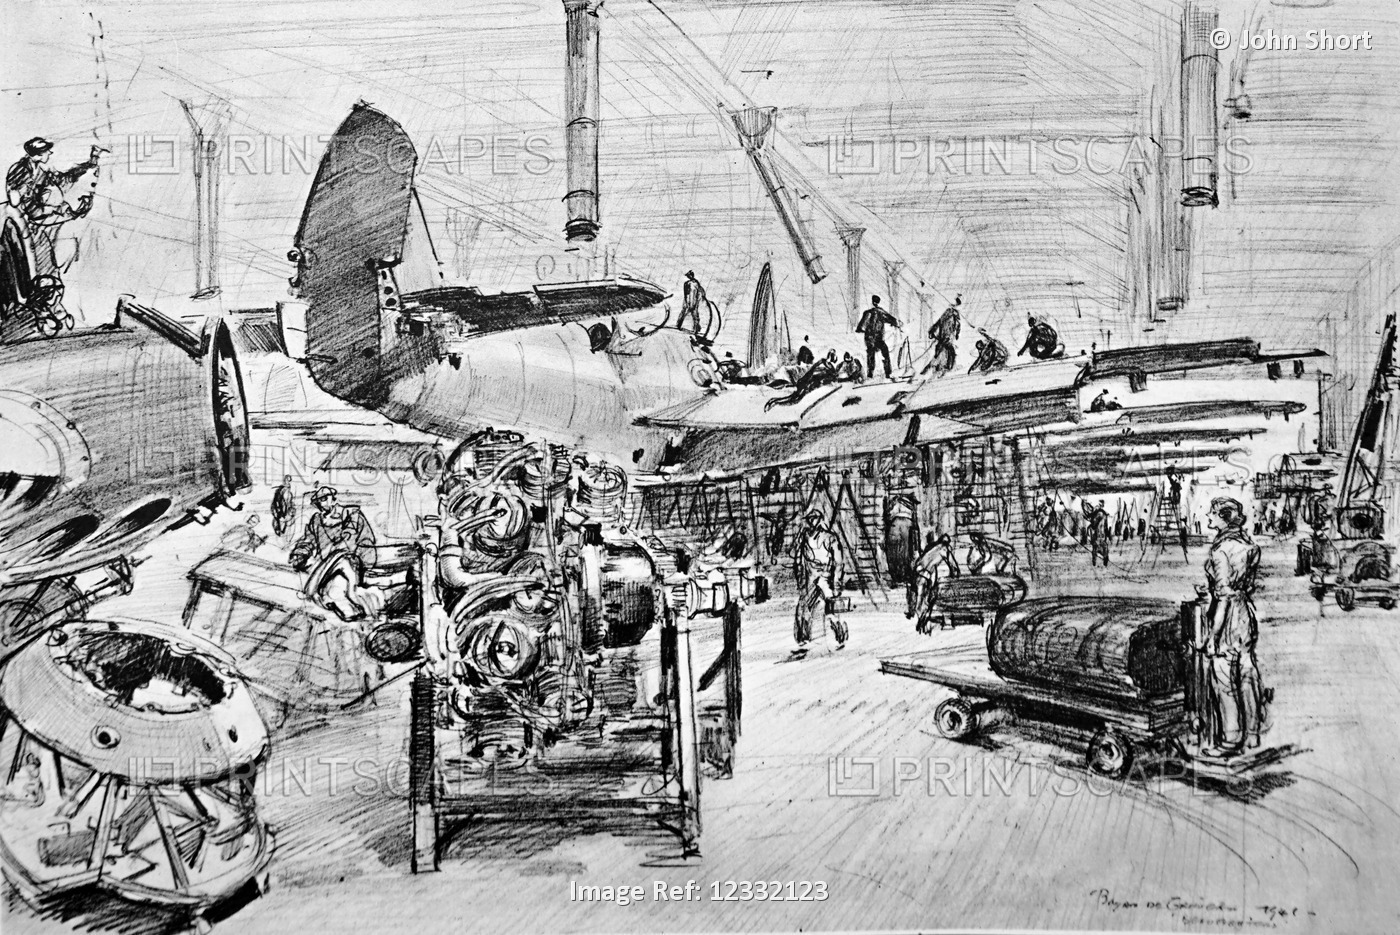 The Illustrated London News 1941. World war II. Beaufighter assembly line with ...